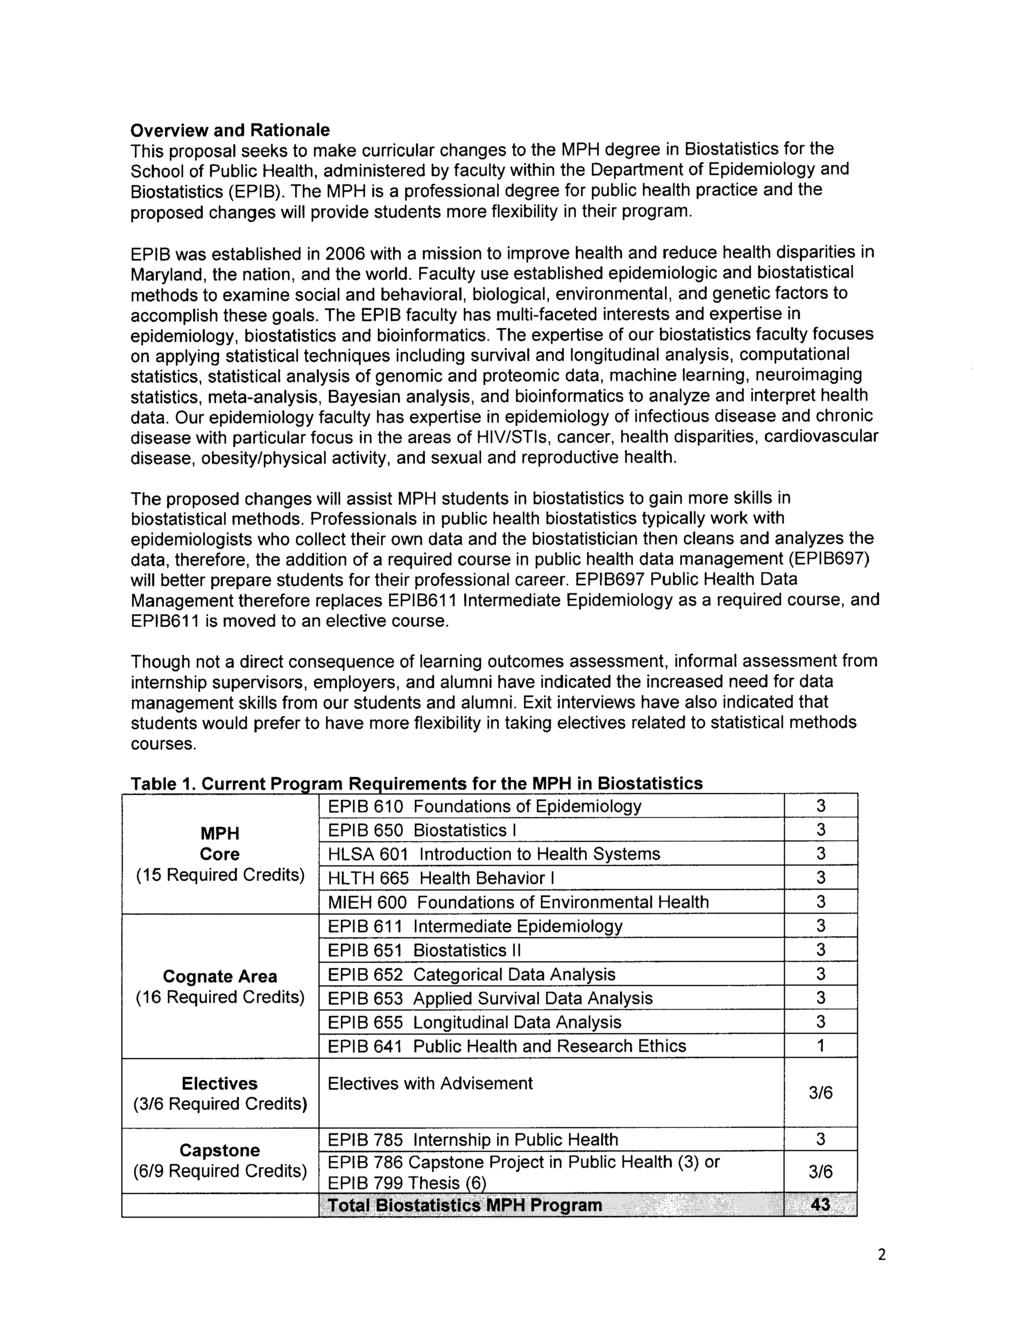 Overview and Rationale This proposal seeks to make curricular changes to the MPH degree in Biostatistics for School of Public Health, administered by faculty within the Department of Epidemiology